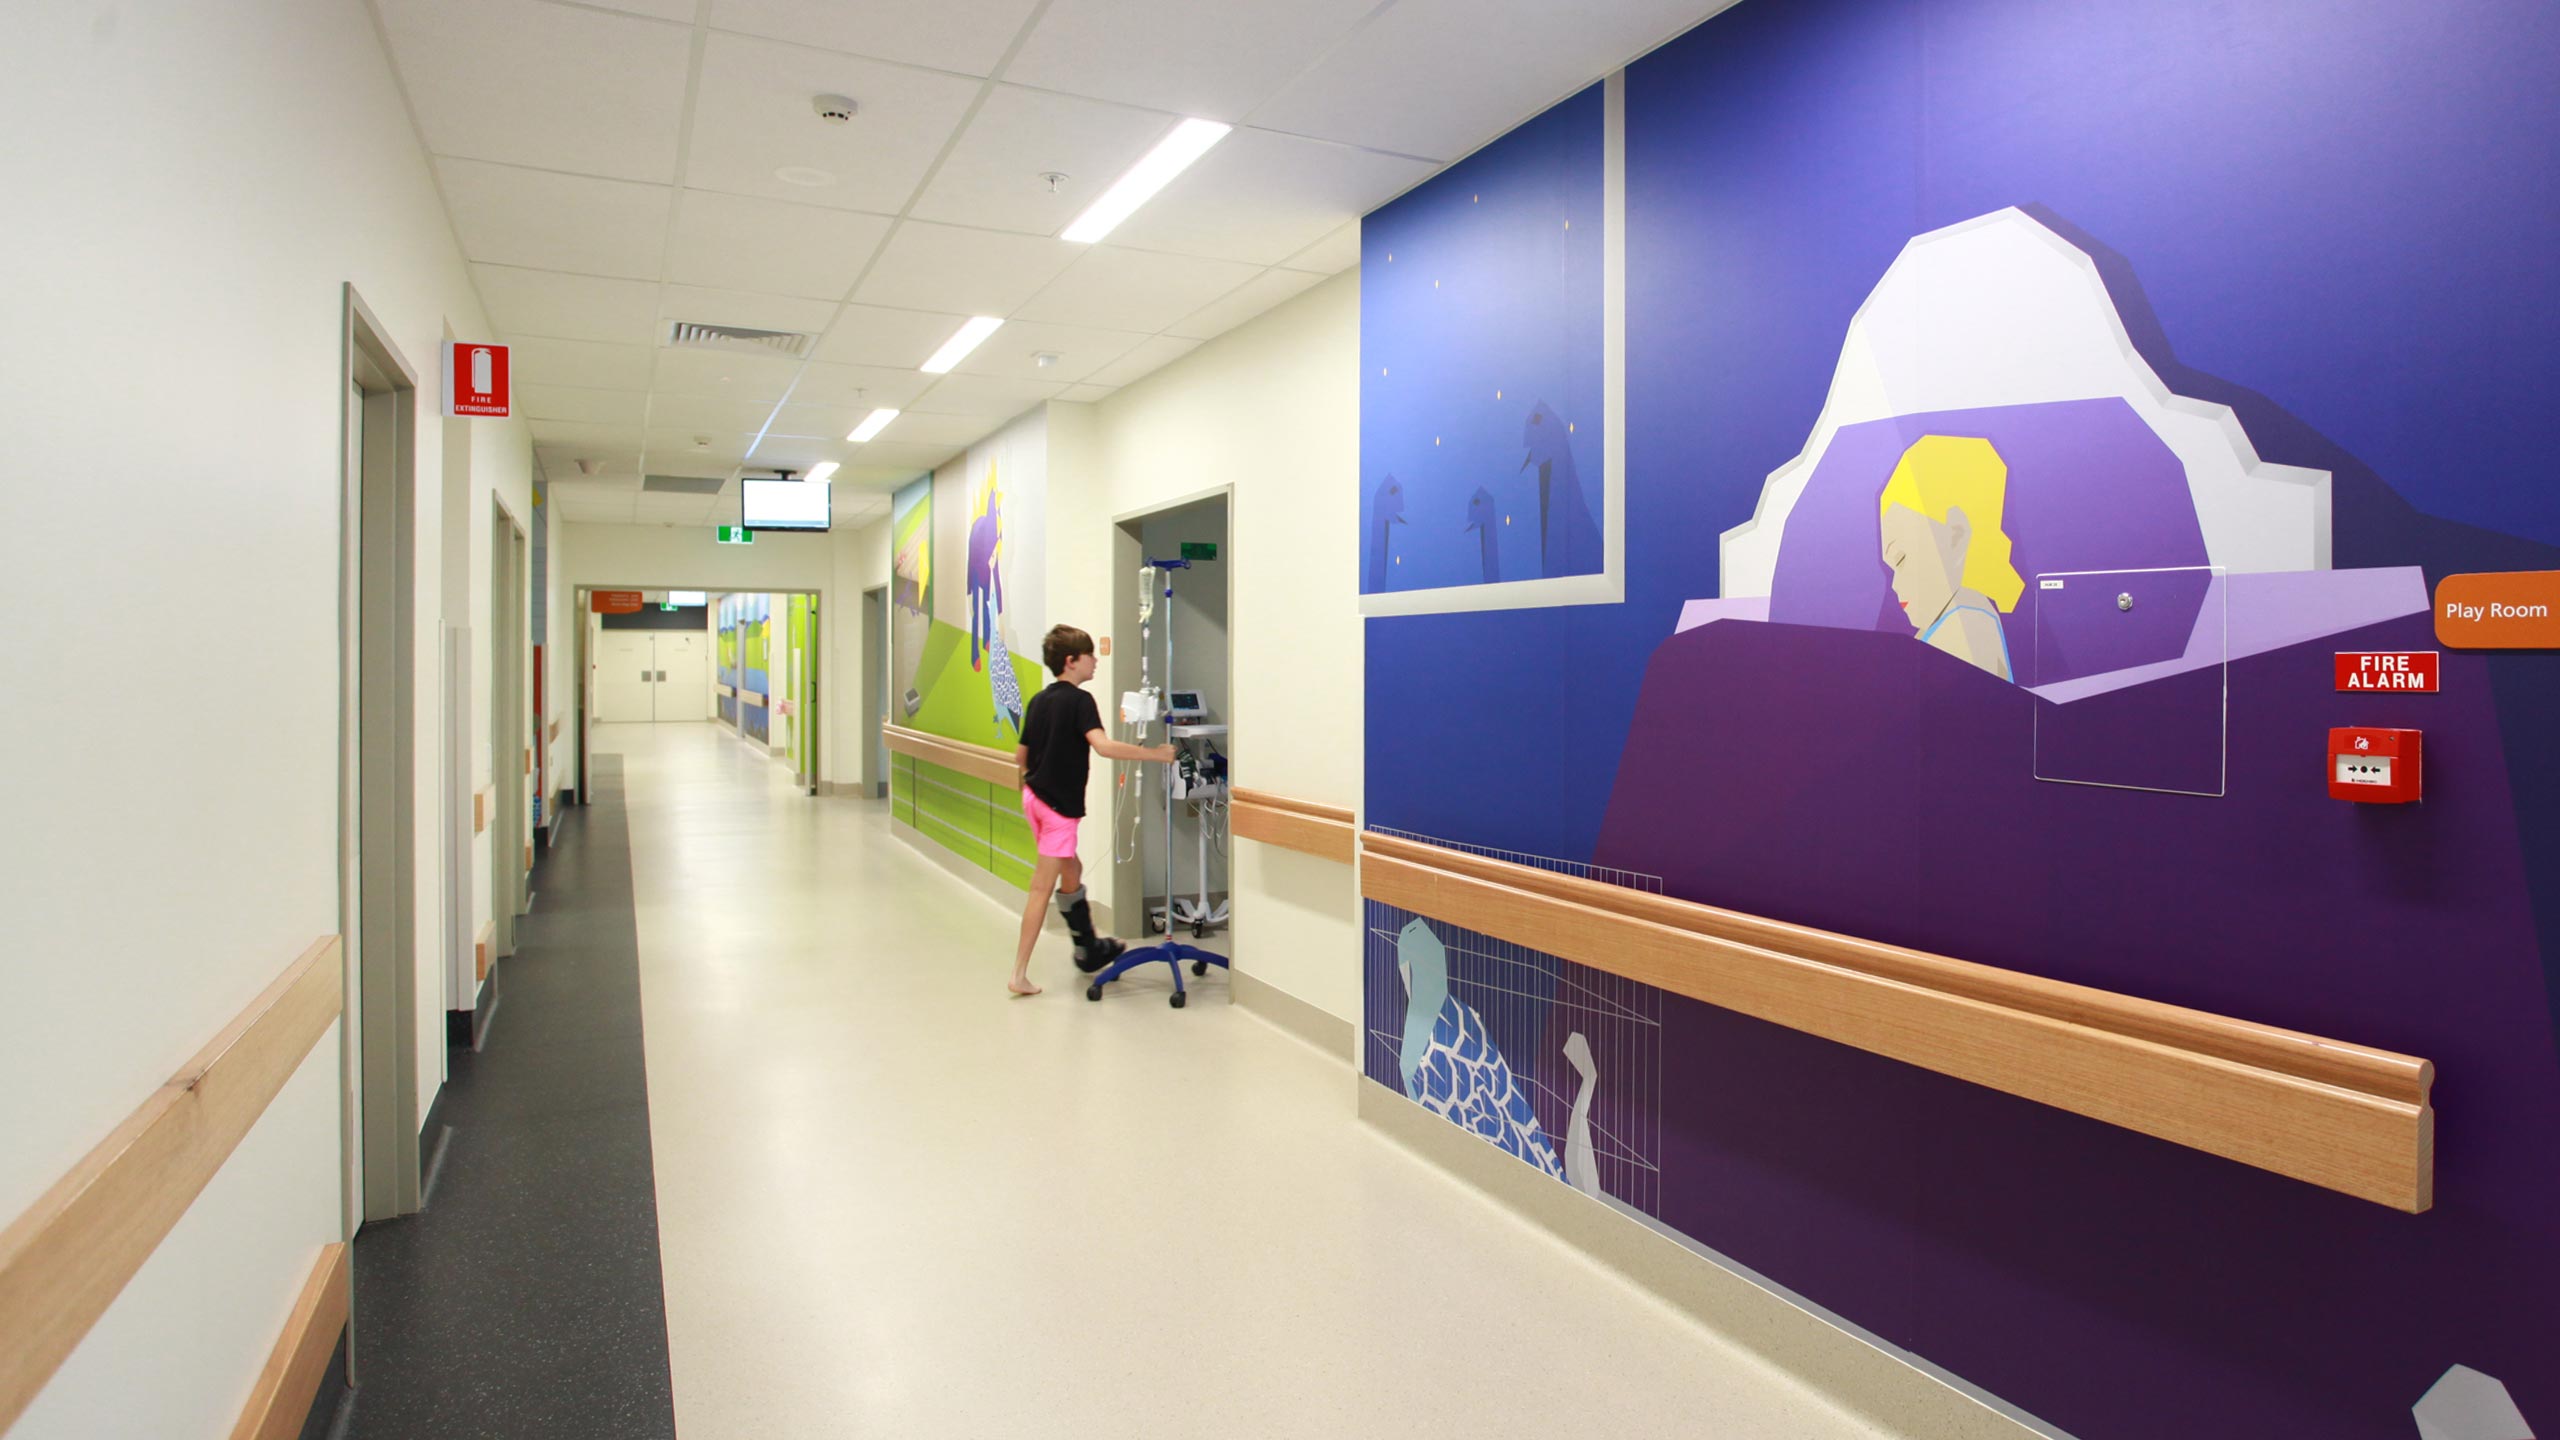 Rachel was selected by the Murrumbidgee Local Health District (MLHD) Arts Strategy Panel to transform 140m2 of space in the Wagga Wagga Rural Referral Hospital Children’s Ward into a healing and hopeful environment using graphic vinyl. The artwork allows staff, patients and visitors to step inside a giant children’s book and follow a timid malleefowl named Mallie on his adventure. Mallie’s story unfolds as you move through the ward, with animals representing doctors and nurses helping him on his journey.